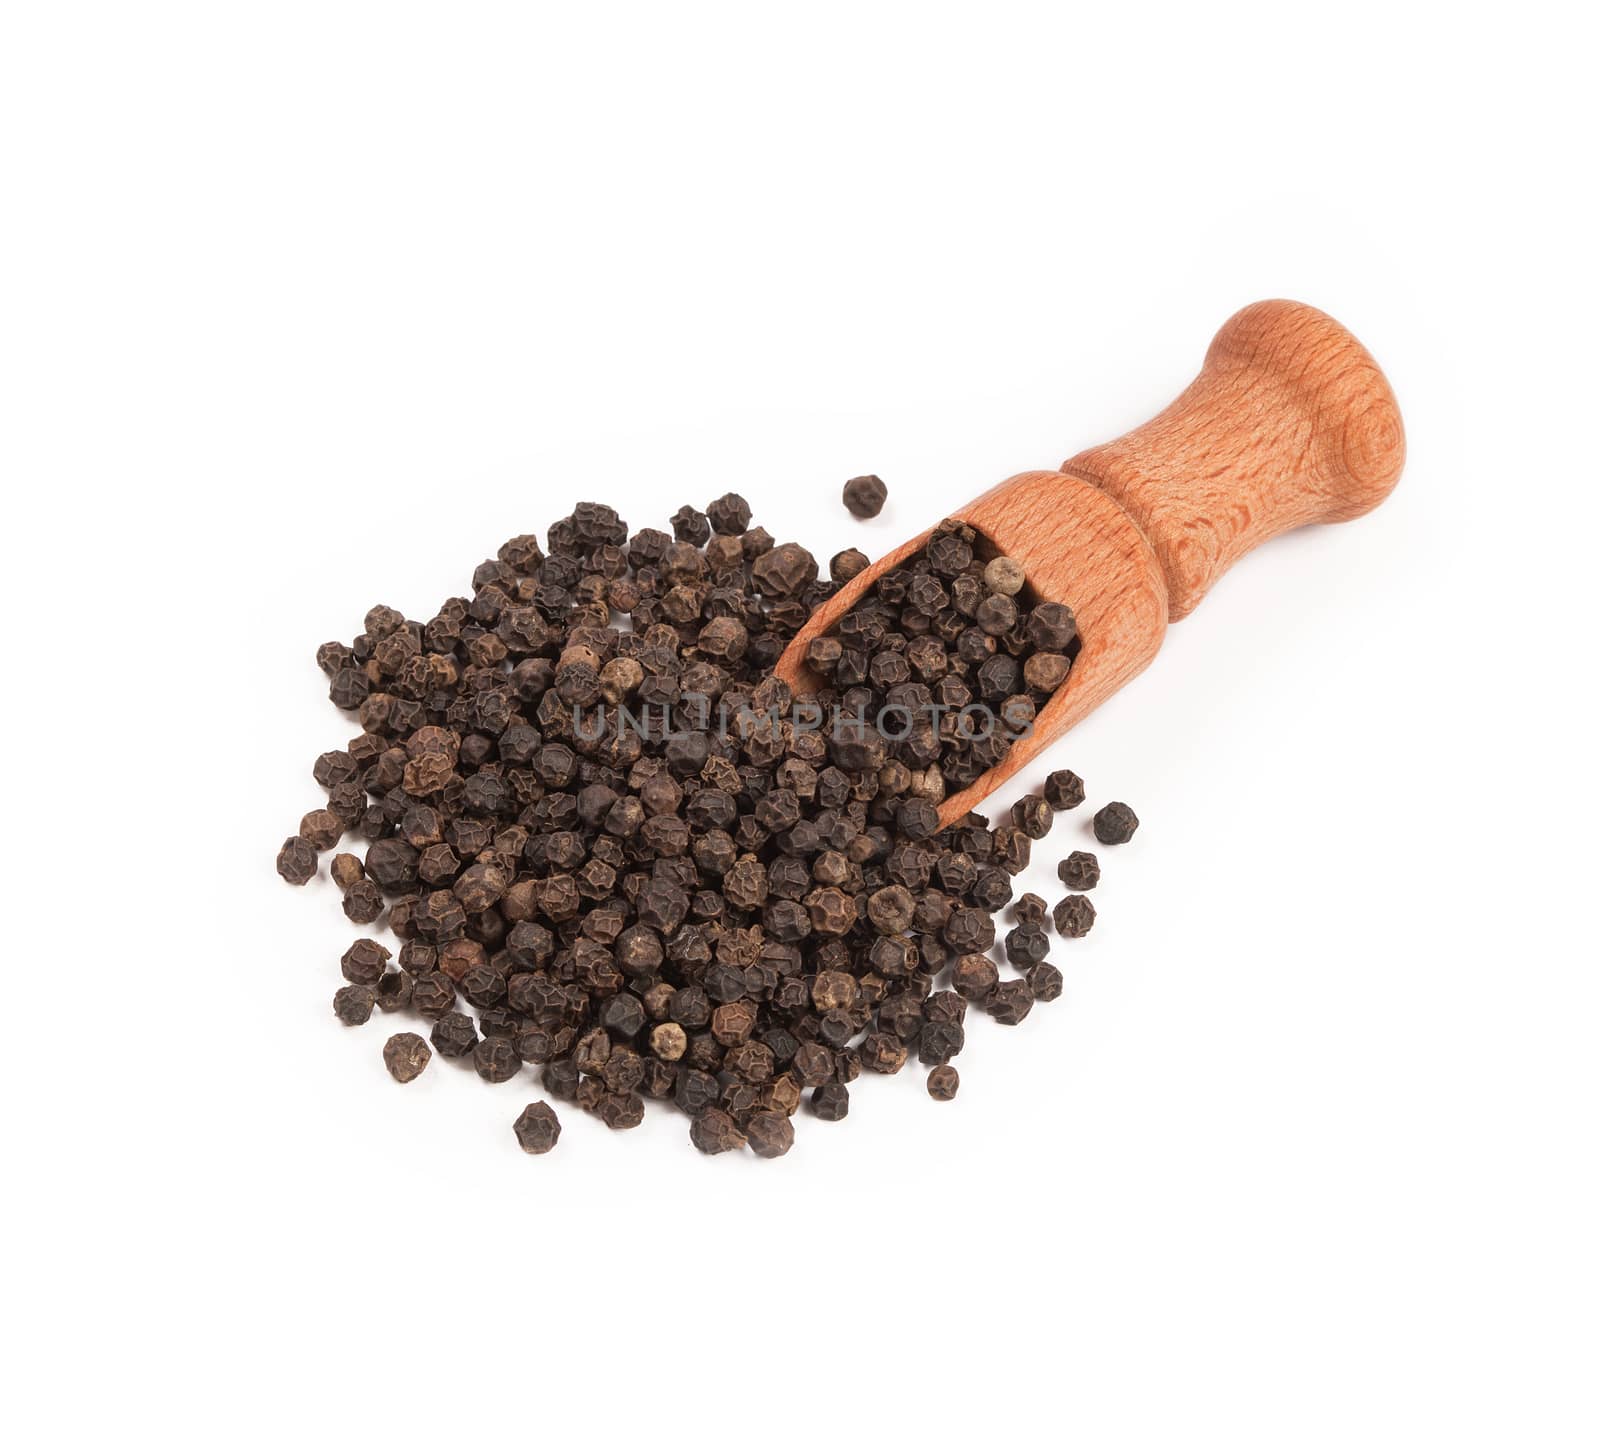 Wooden shovel with black peppercorn scattered from it.